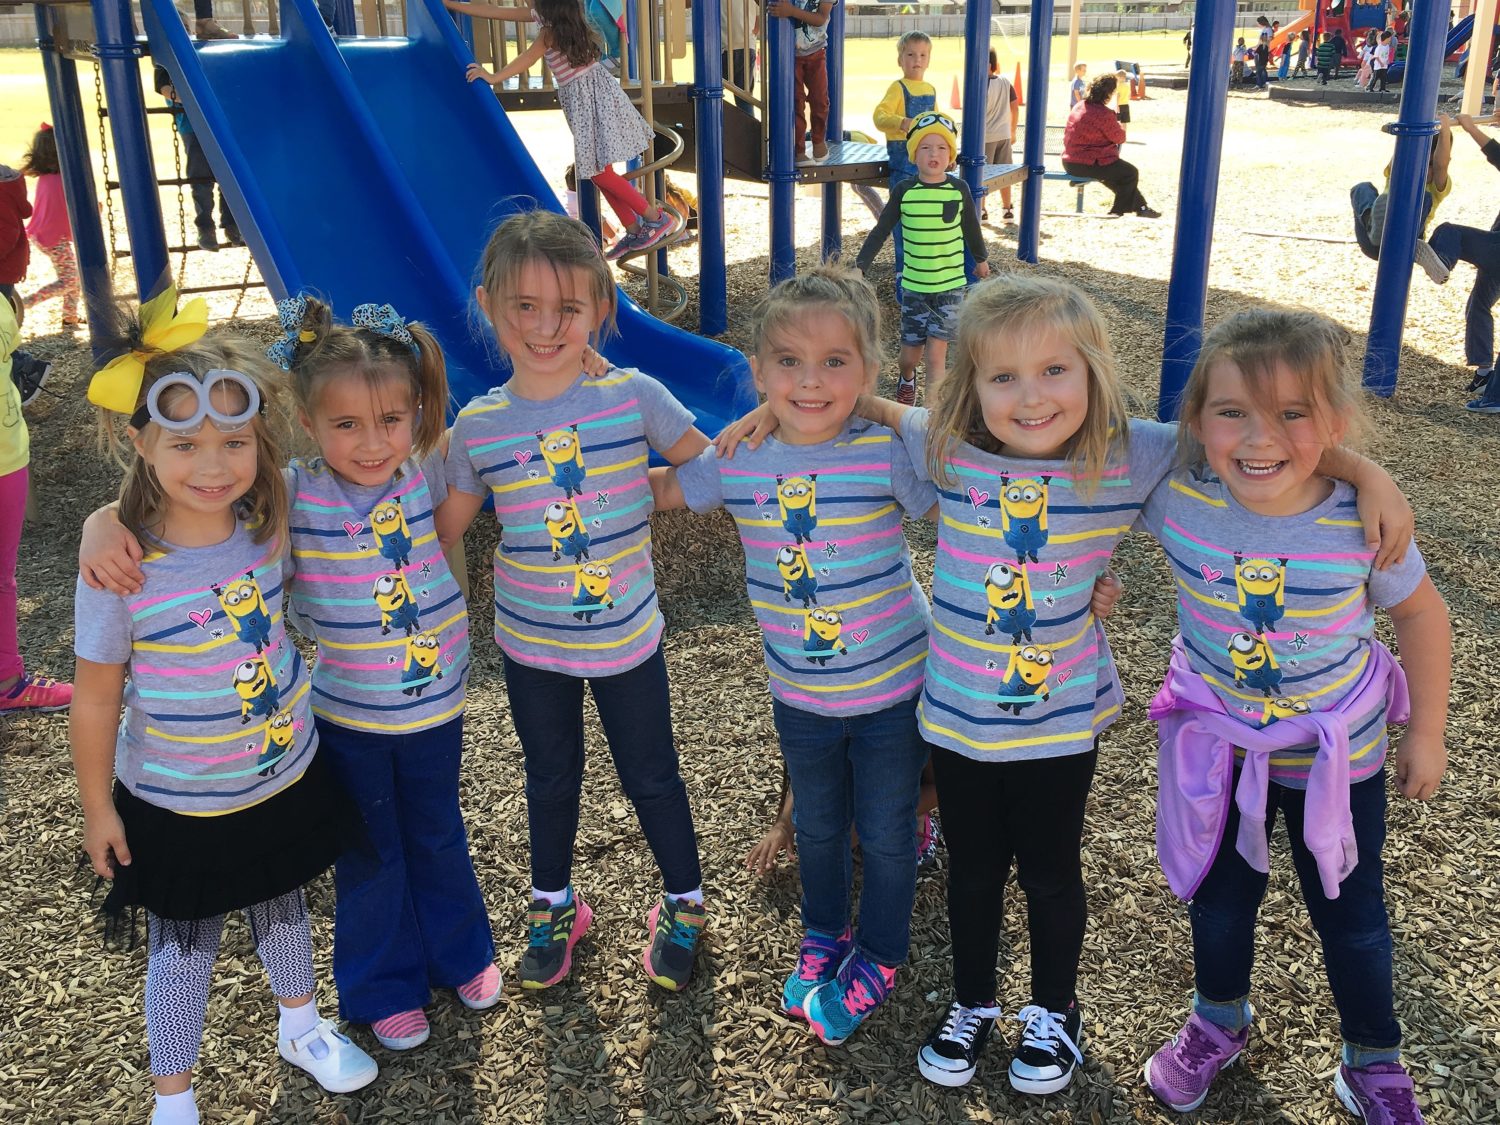 a group of six girls wearing the same shirt smile